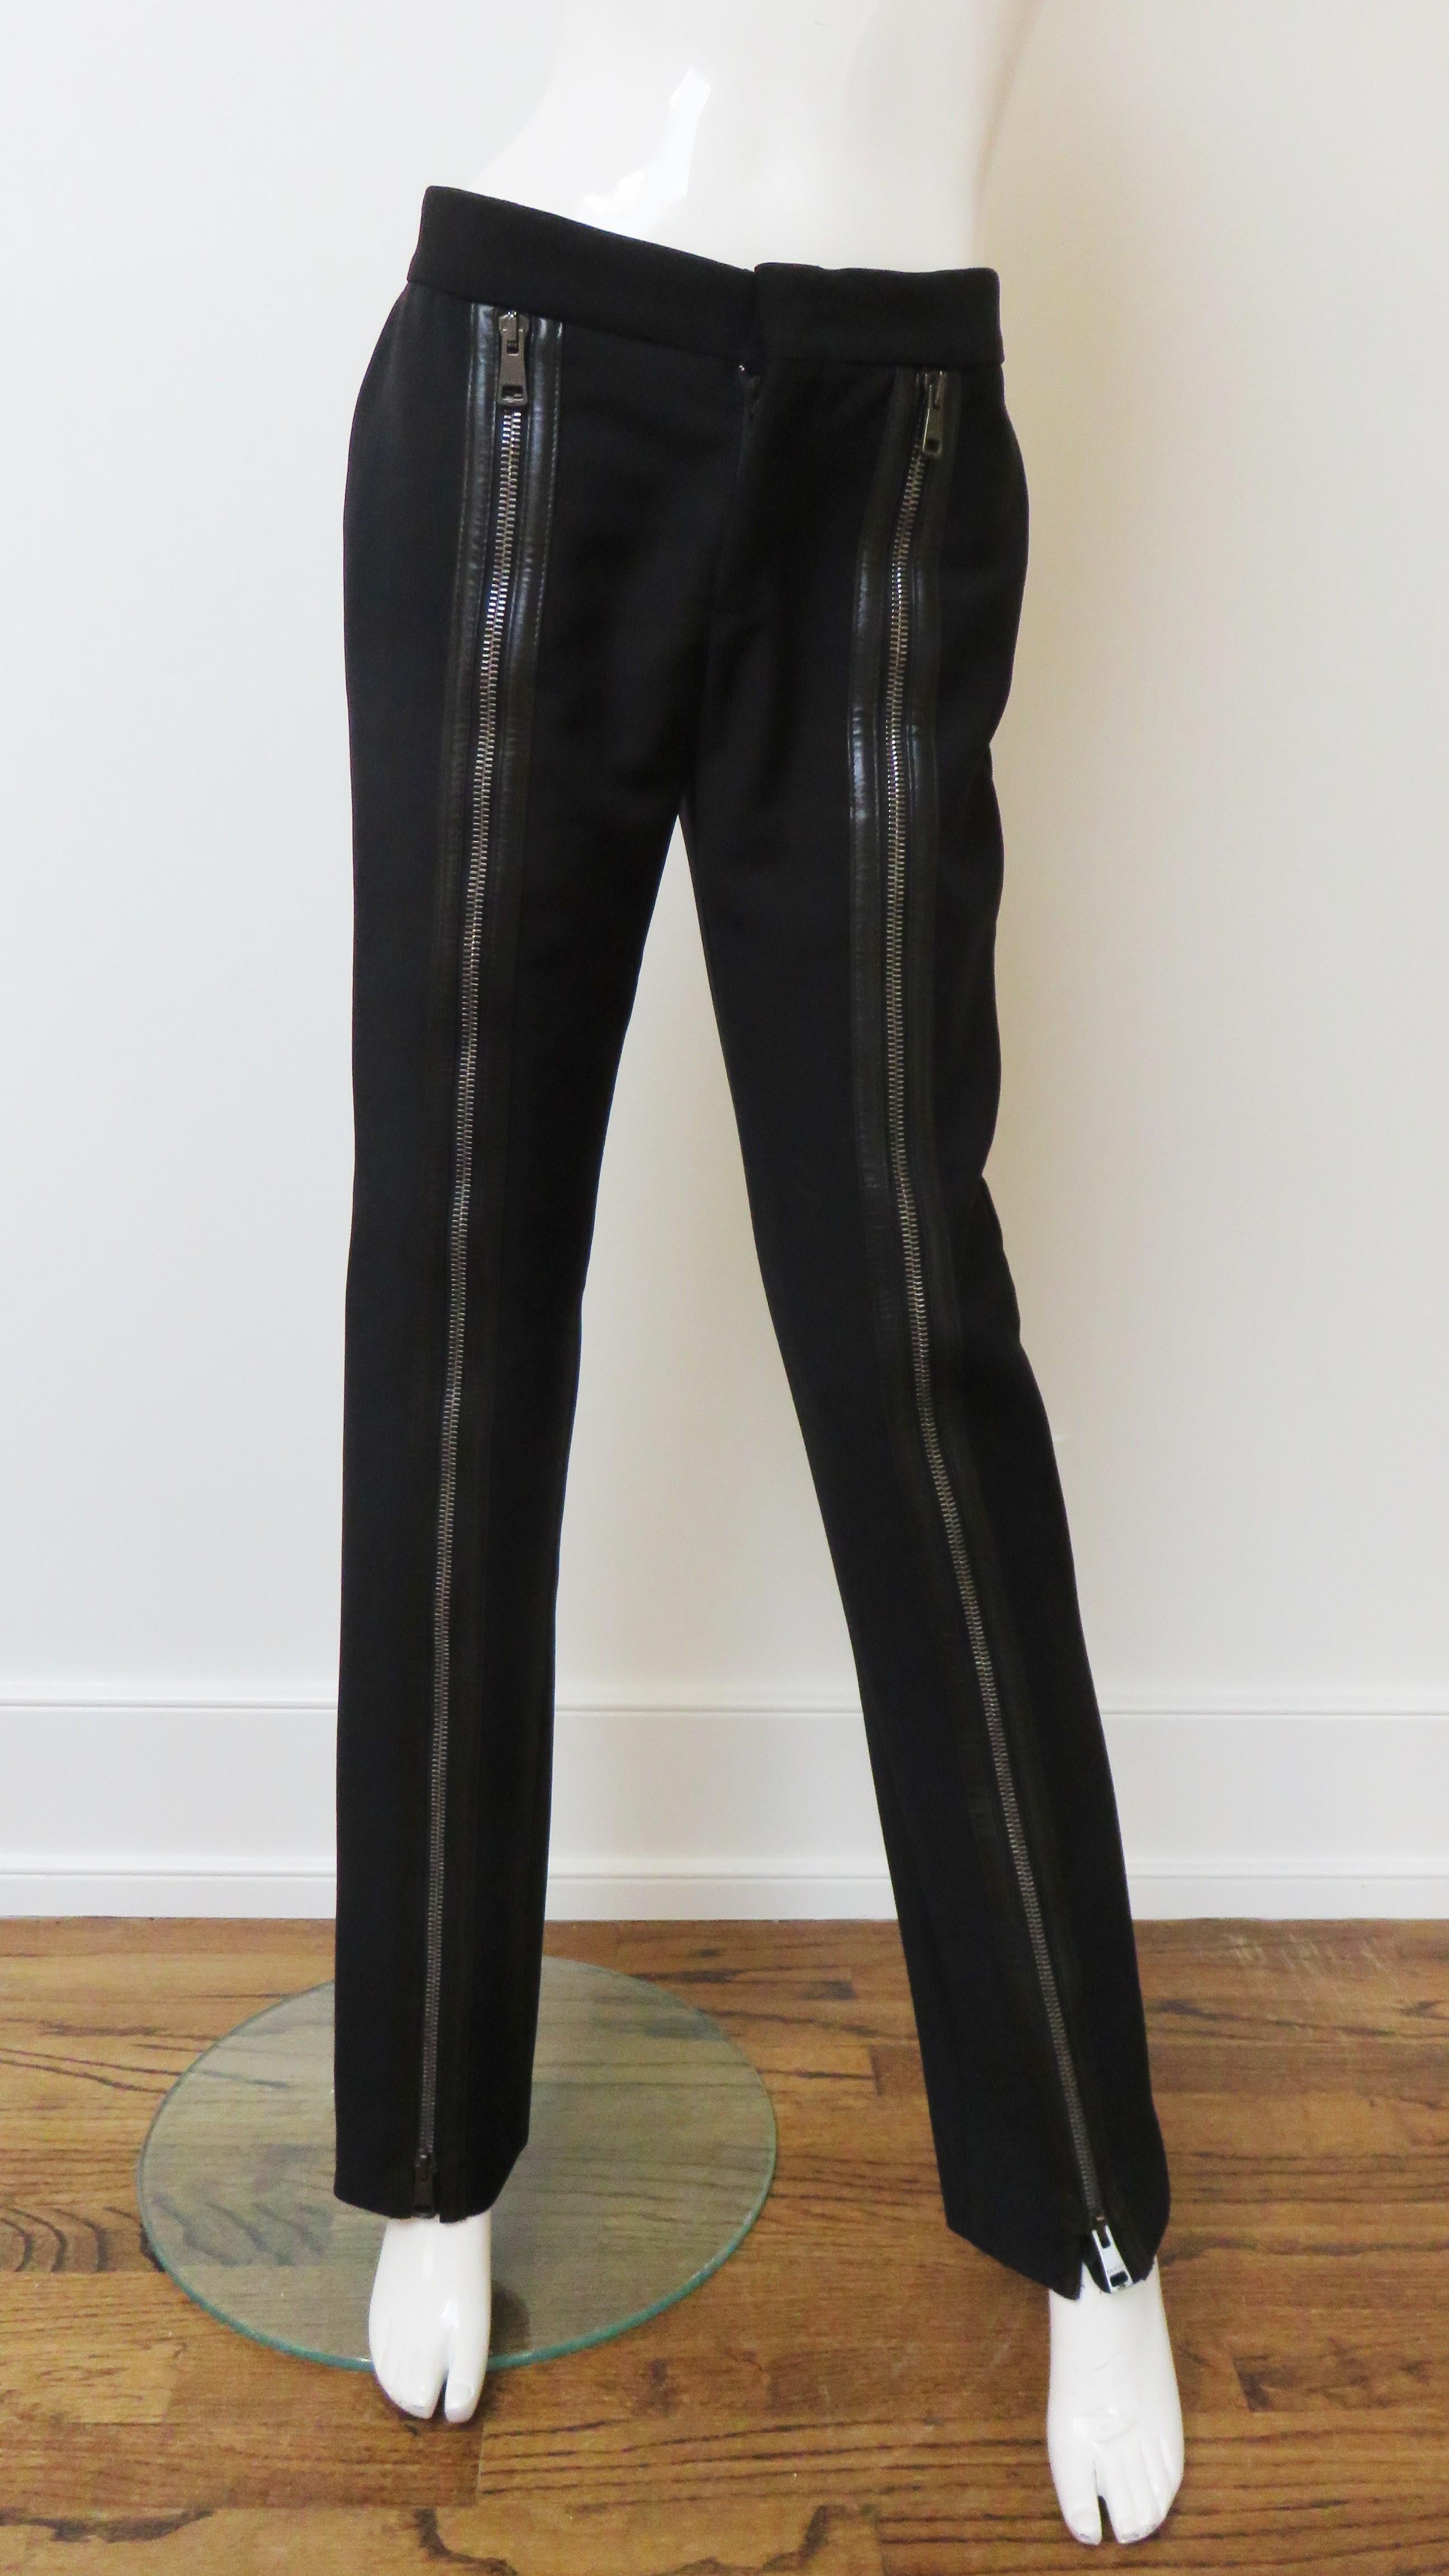 Tom Ford for Gucci Pants with Zipper Legs A/W 2001 In Excellent Condition For Sale In Water Mill, NY